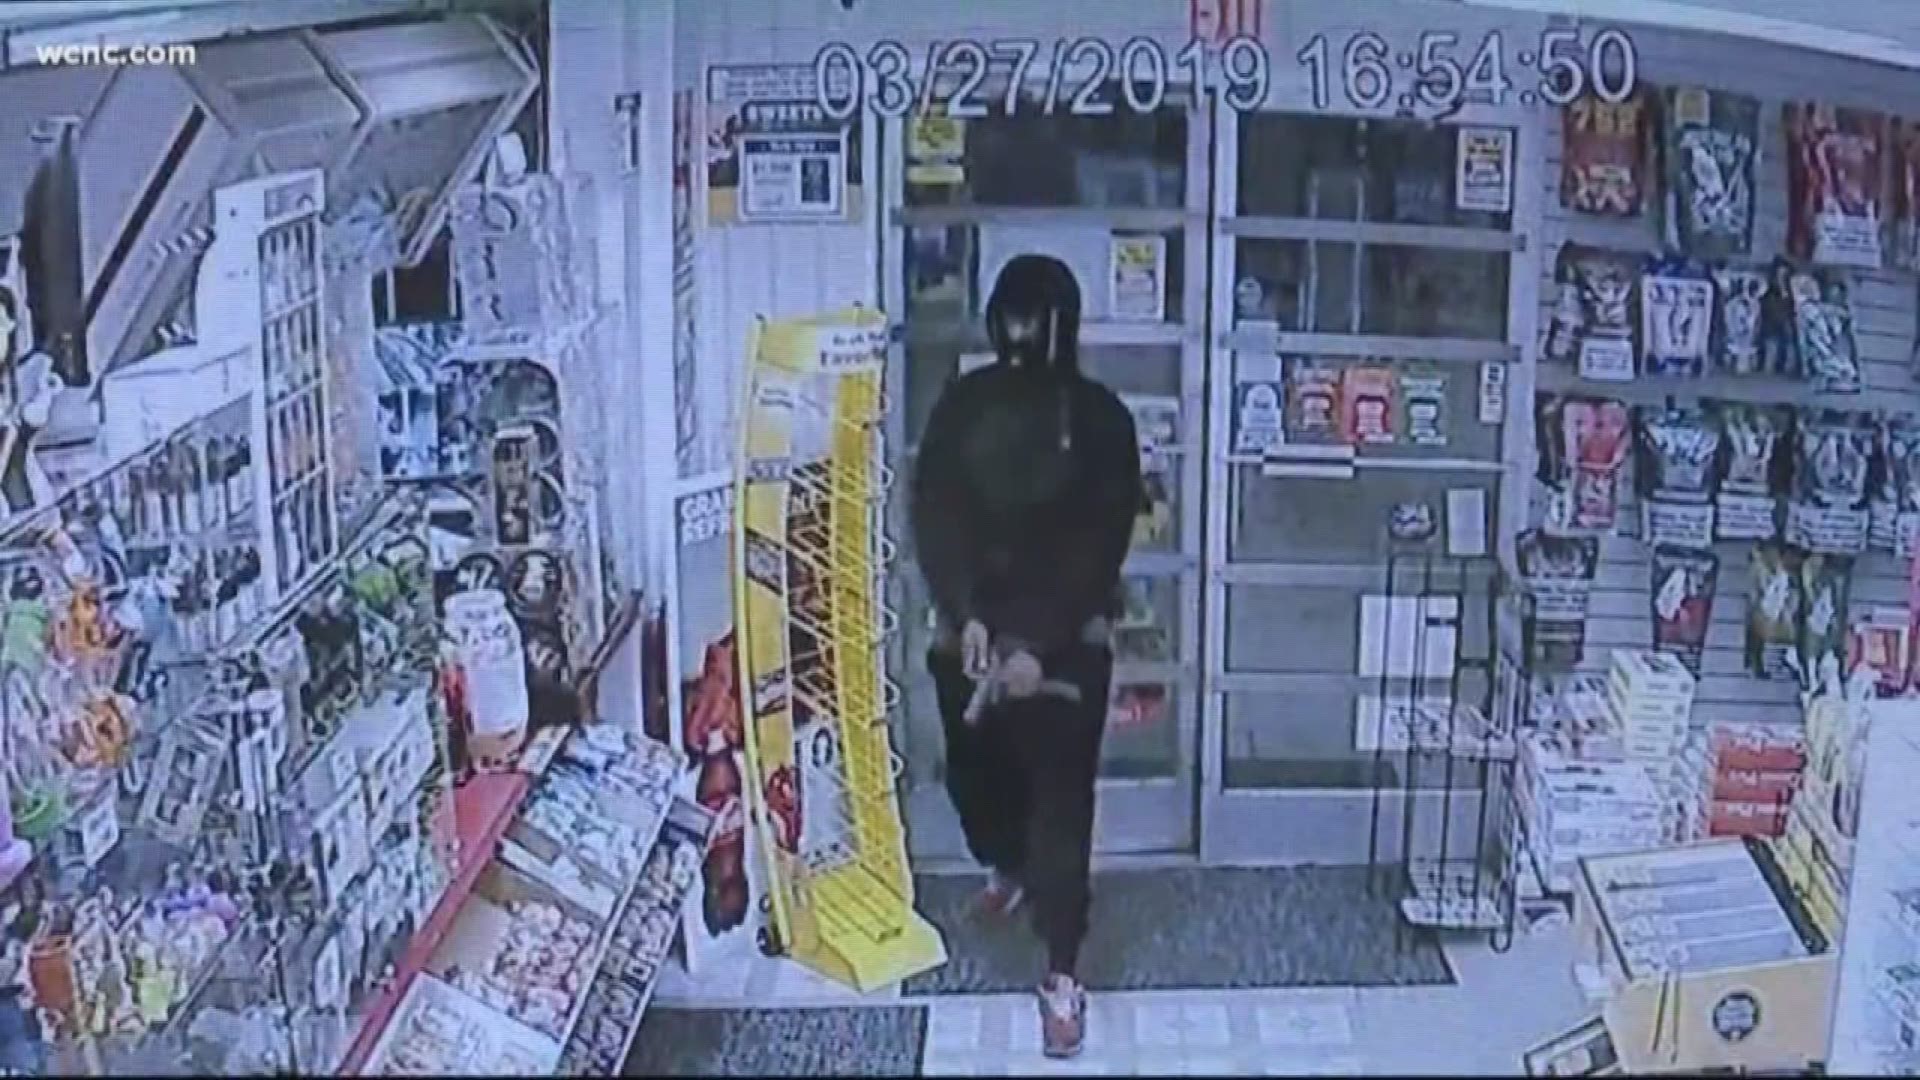 Gastonia Police released new surveillance pictures from an armed robbery inside a convenience store last month.